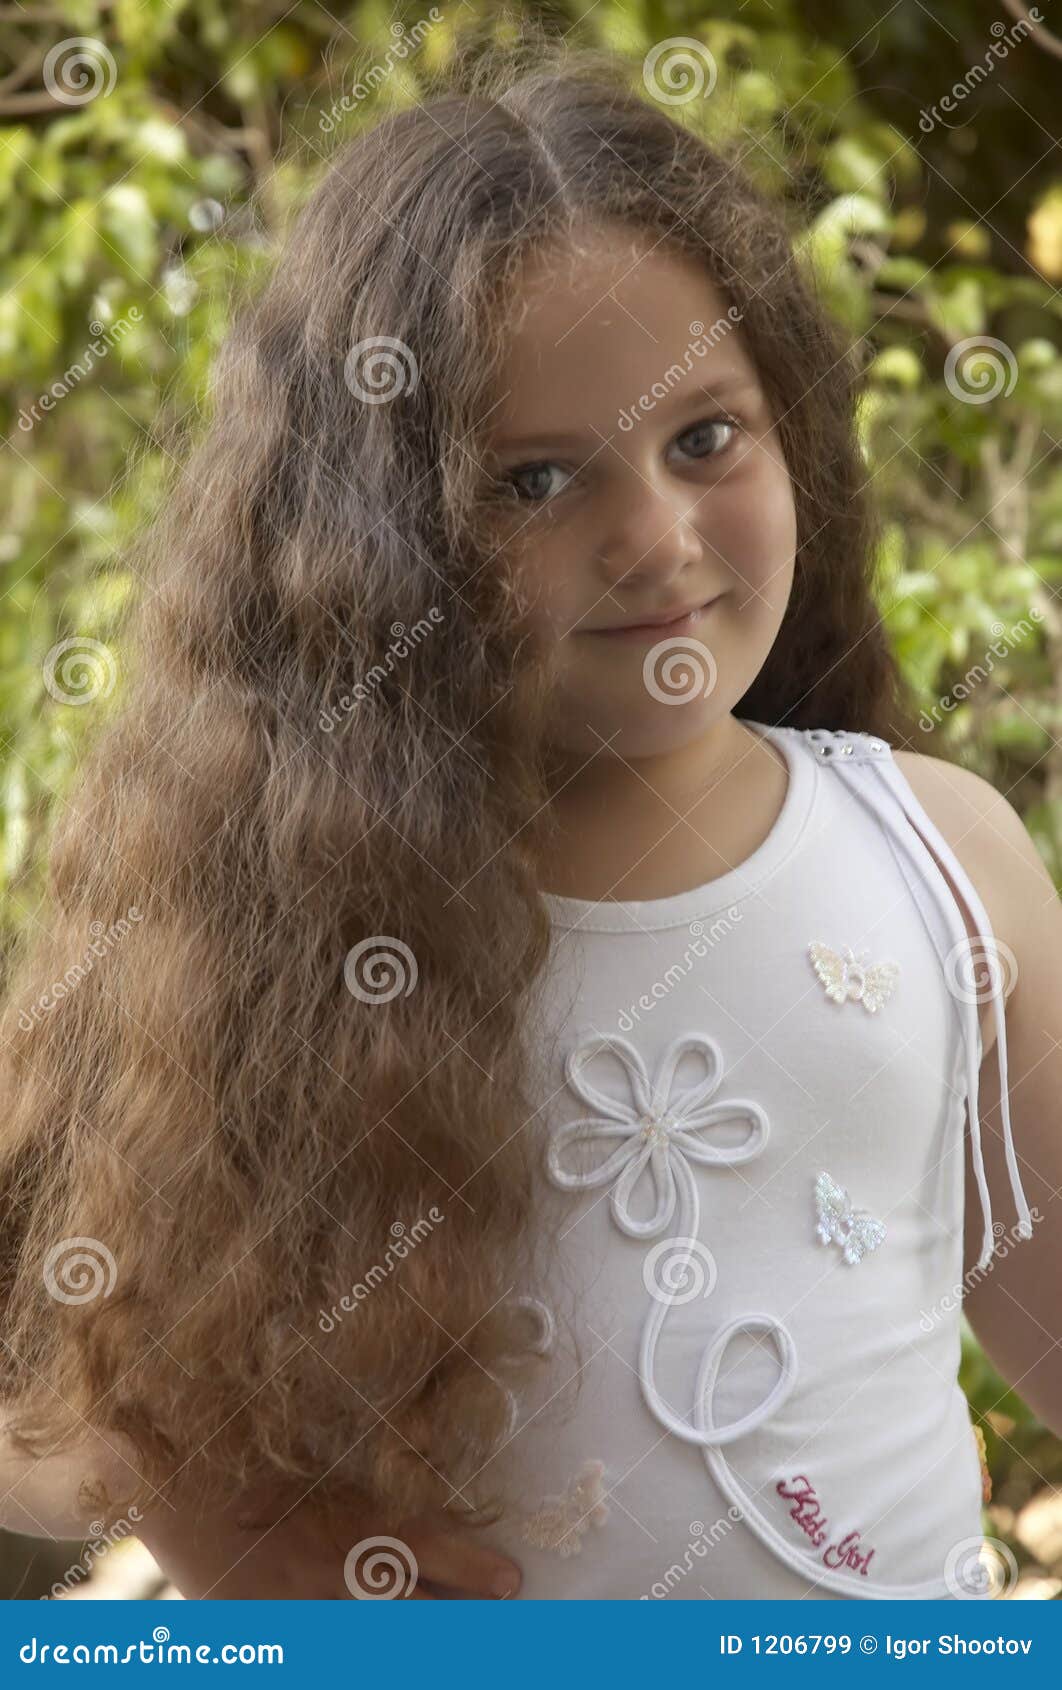 Young Girl With Long Hair Stock Image Image Of Face Hair